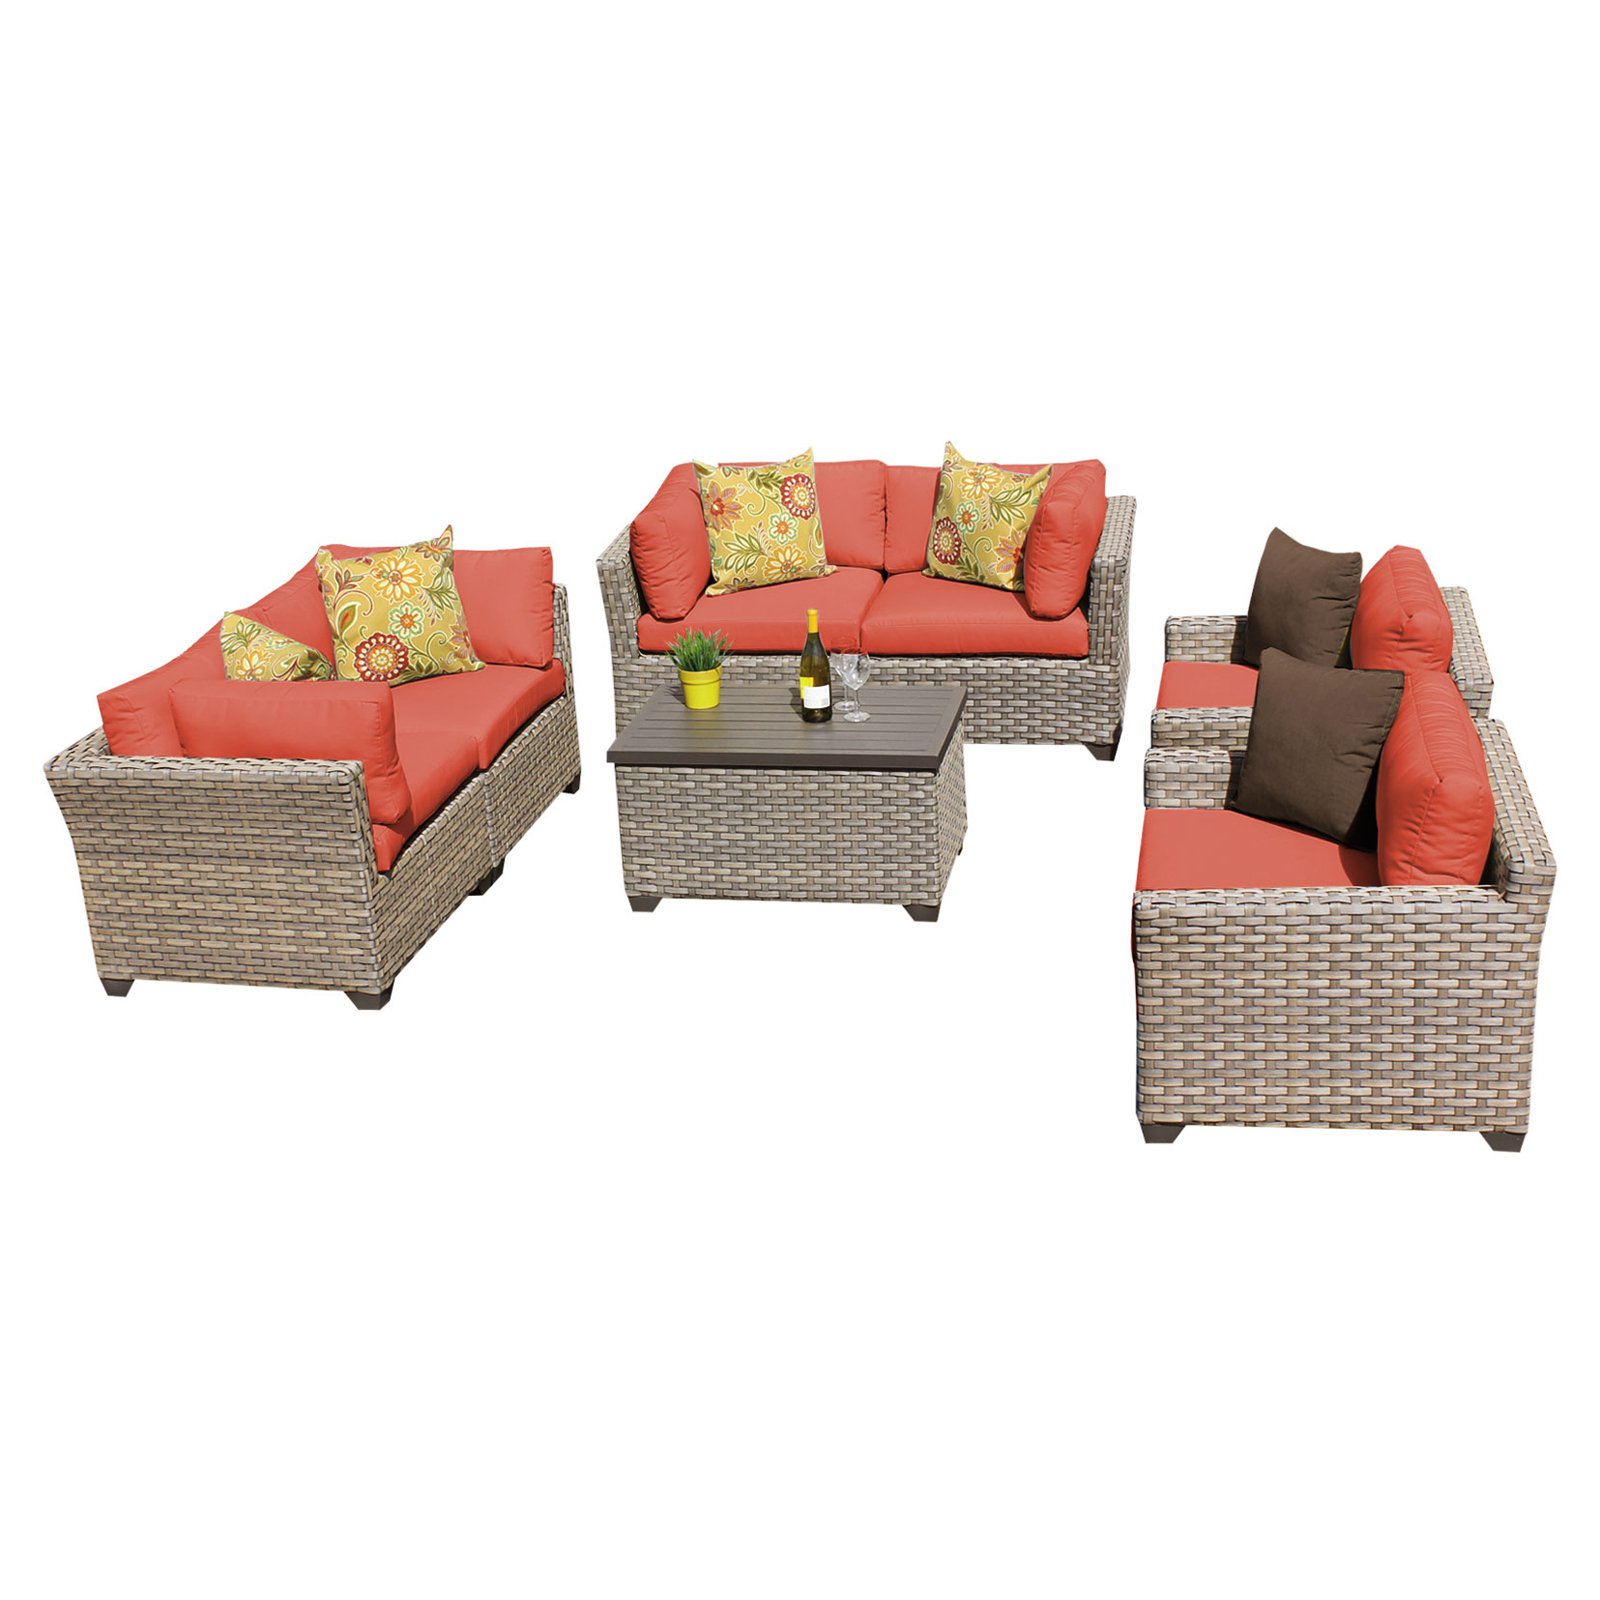 TK Classics Monterey Wicker 7 Piece Patio Conversation Set with Club Chair and 2 Sets of Cushion Covers - image 1 of 5